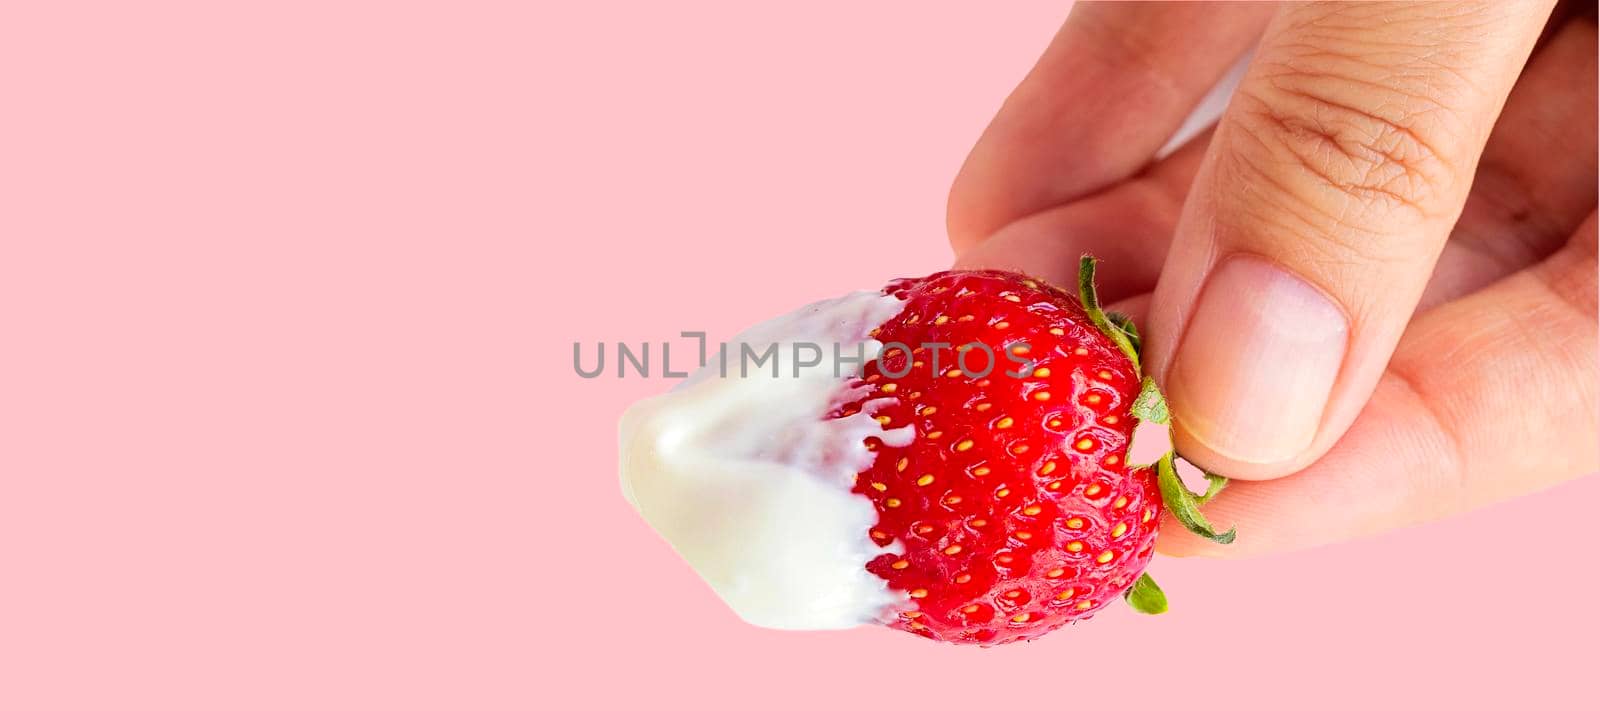 banner with female hand holds a strawberry with cream. juicy, sweet, ripe, red strawberries on a pink background. isolate